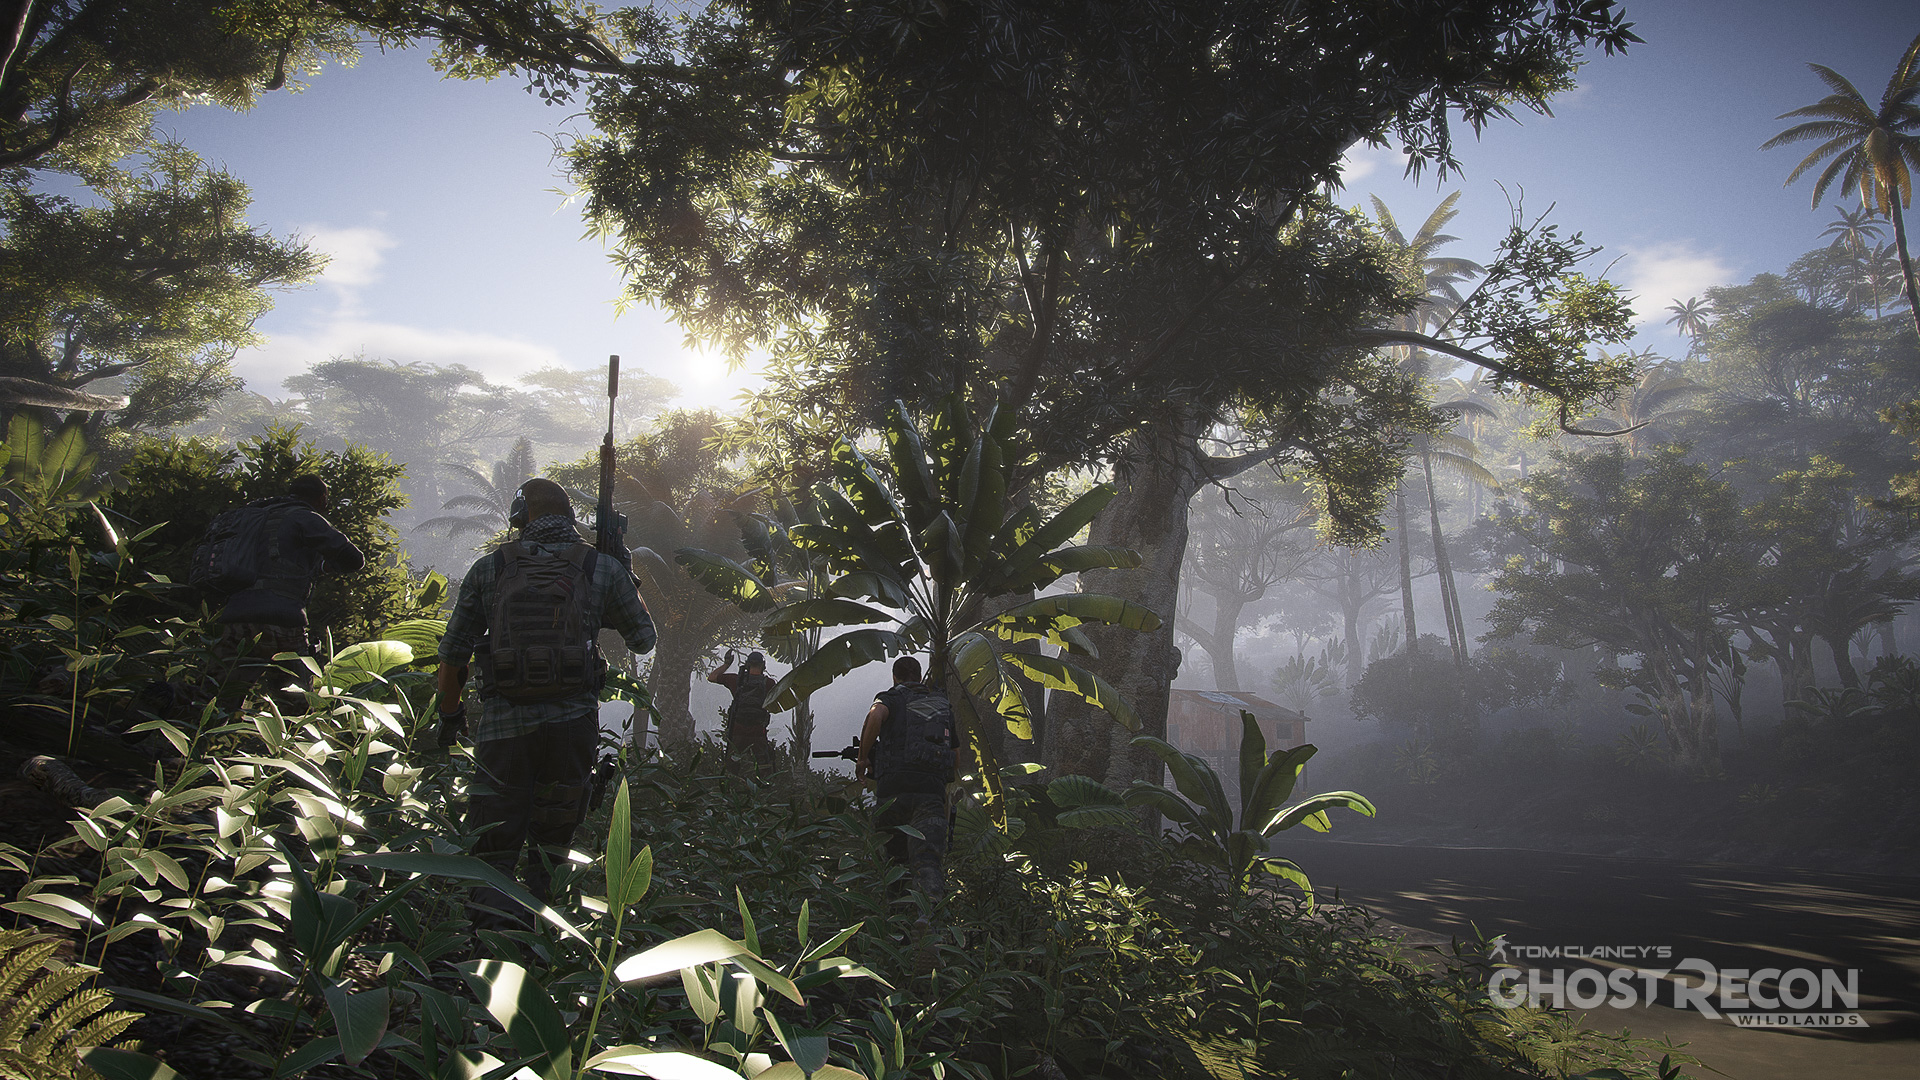 Some beautiful jungle scenery in Ghost Recon Wildlands